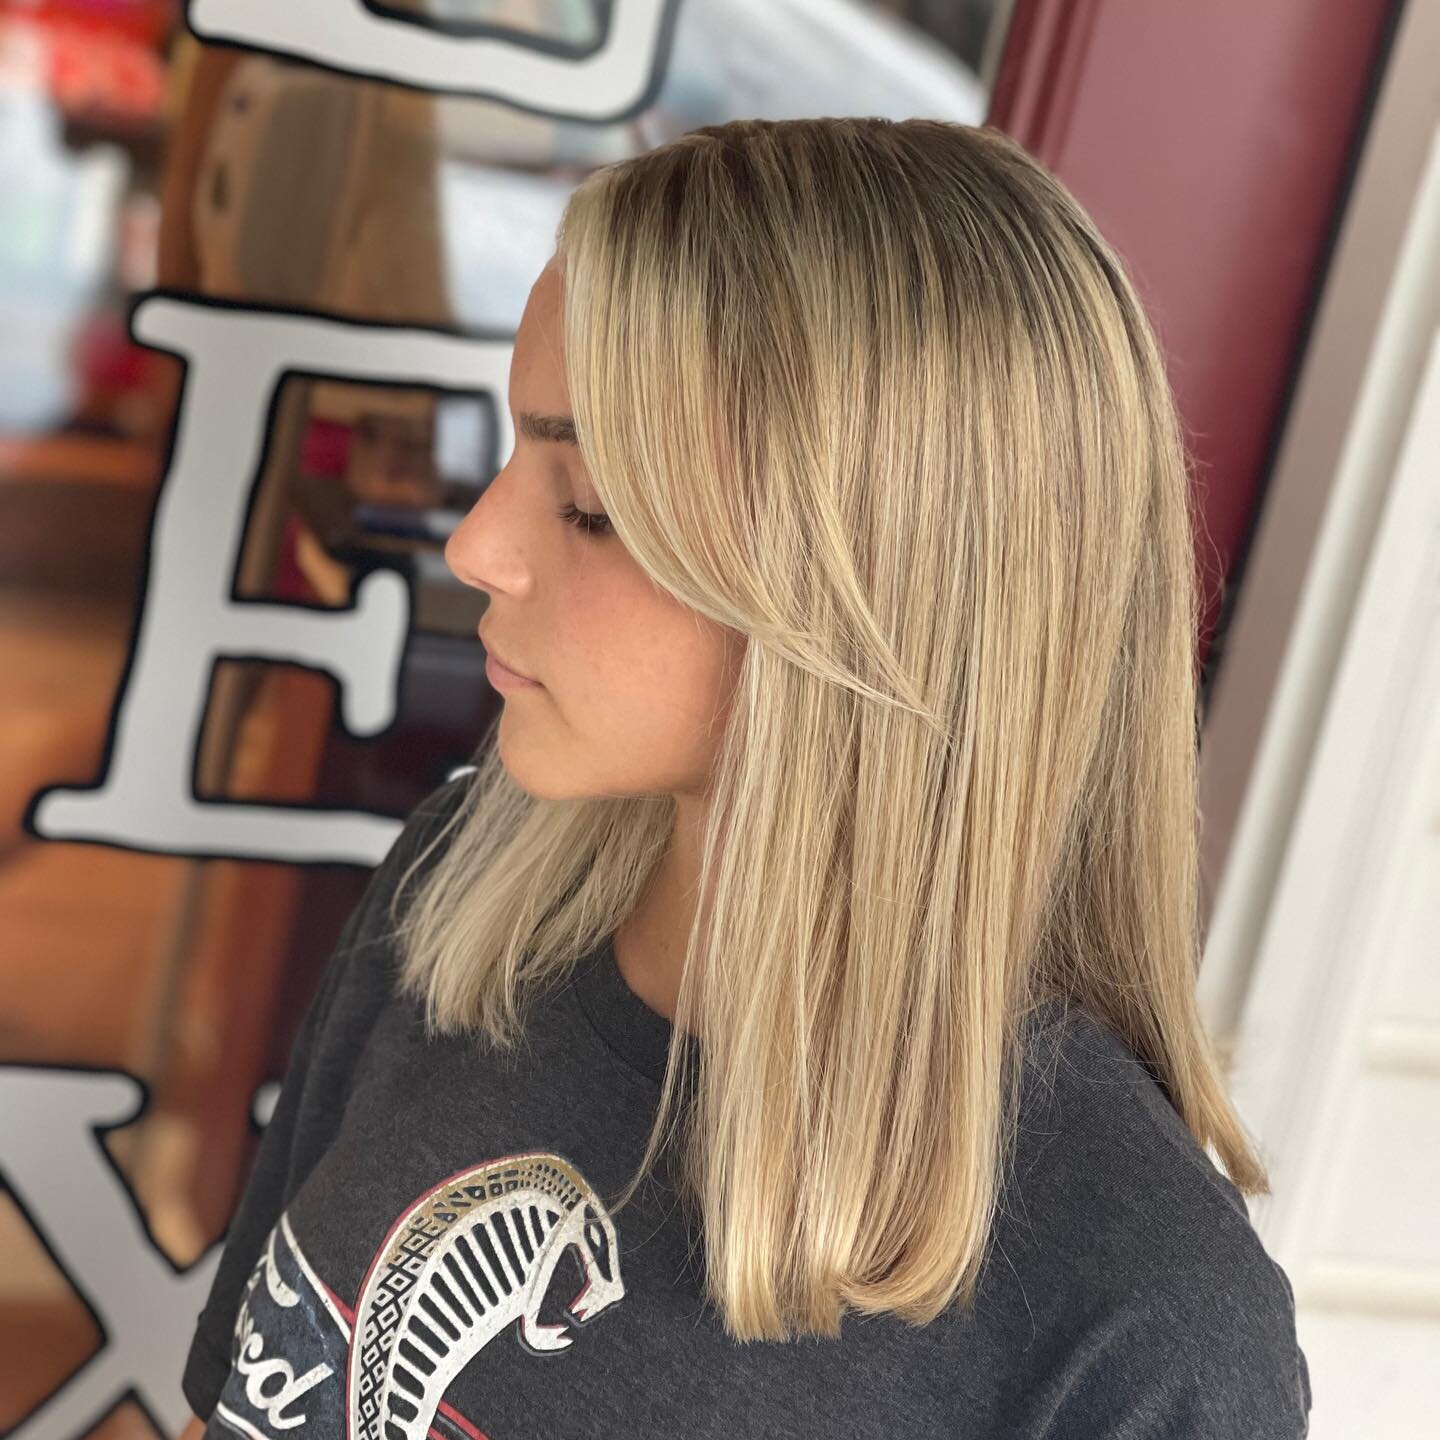 Full highlight w/ toner, called &quot;steel me to Italy&quot; - this name we&rsquo;re on board with 
.
Hairstylist: Amanda Nesspor 💇🏼&zwj;♀️
.
.
.
.
#lexsalon #phoenixville #phoenixvillepa #pville #pvillepa #hairstylist #phoenixvillehairstylist #ph